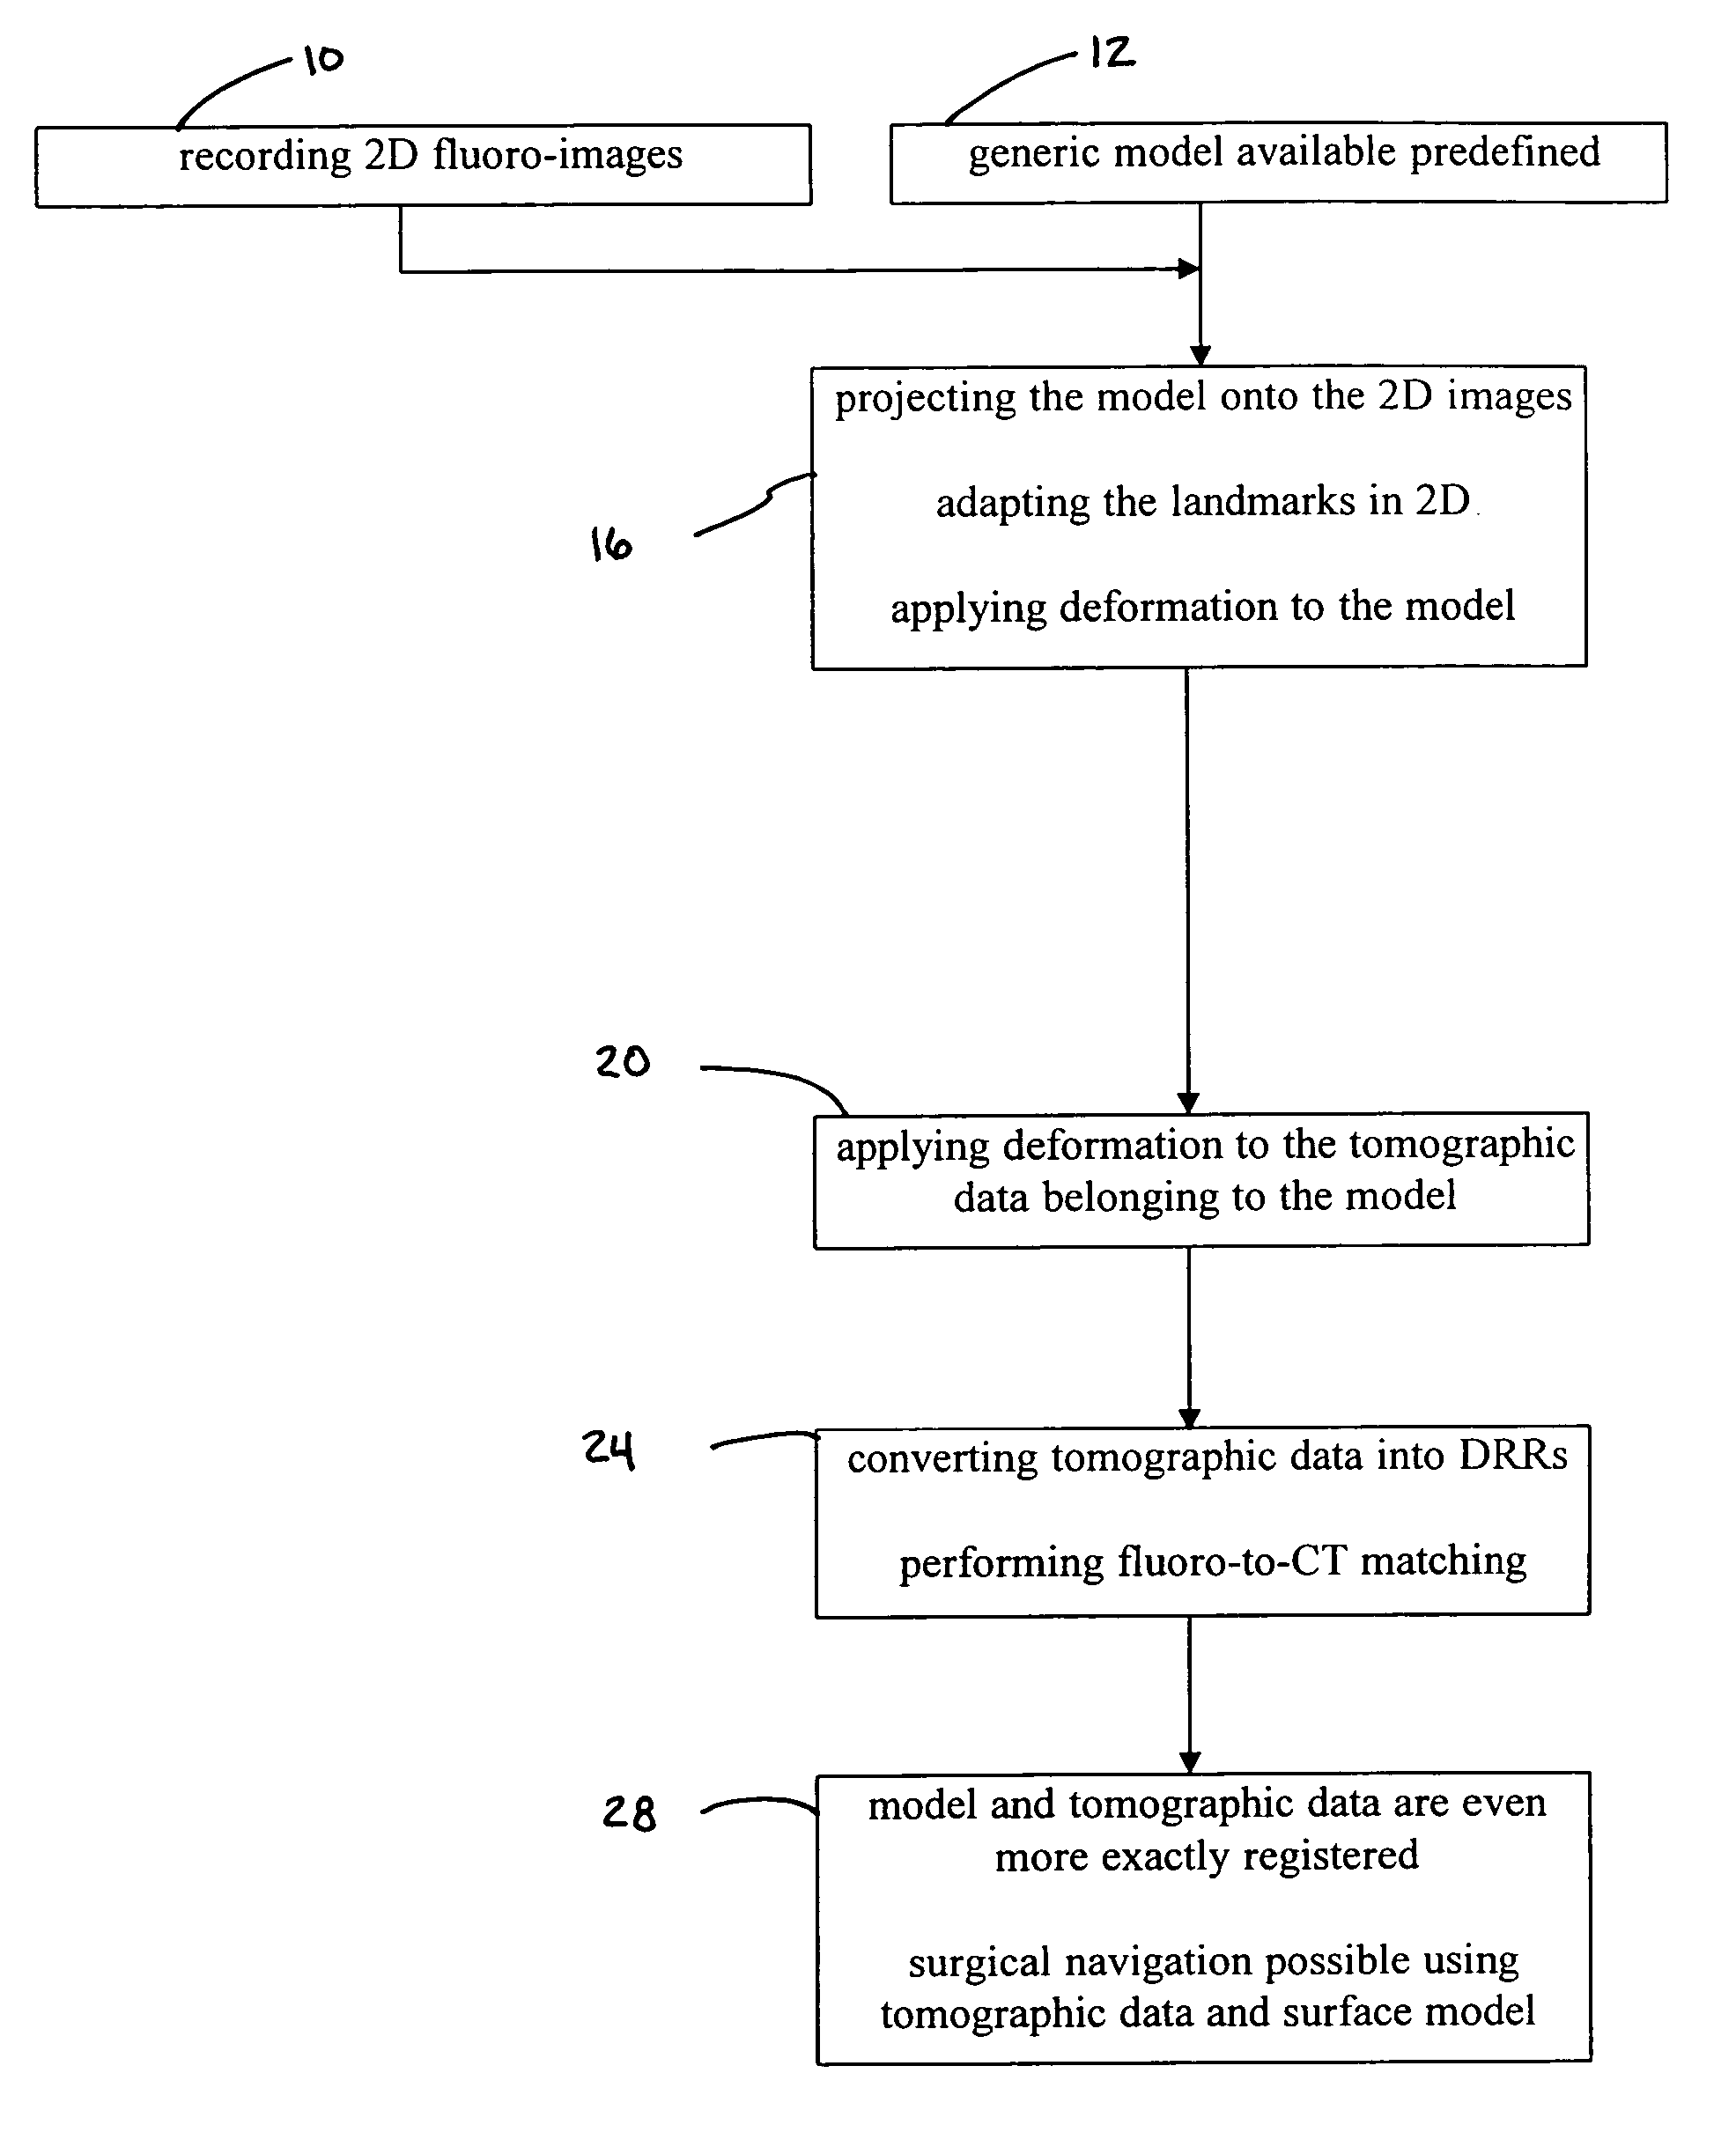 Planning and navigation assistance using two-dimensionally adapted generic and detected patient data